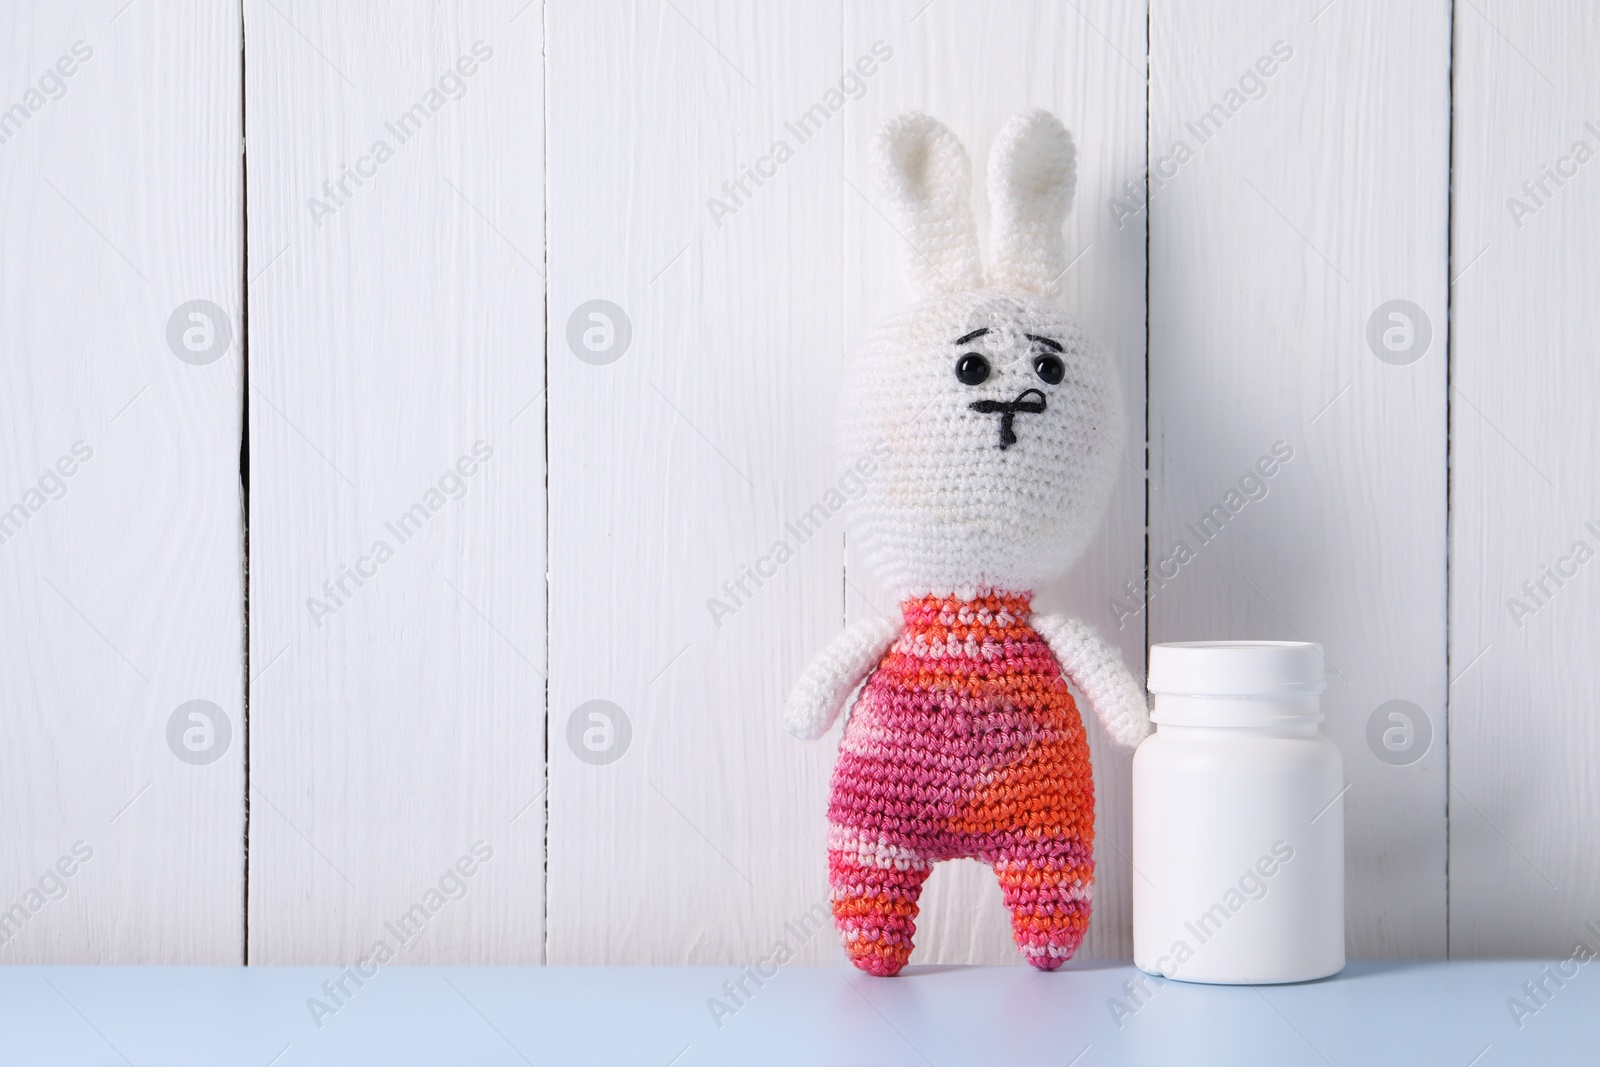 Photo of Toy bunny and bottle of pills on light blue table near white wooden wall, space for text